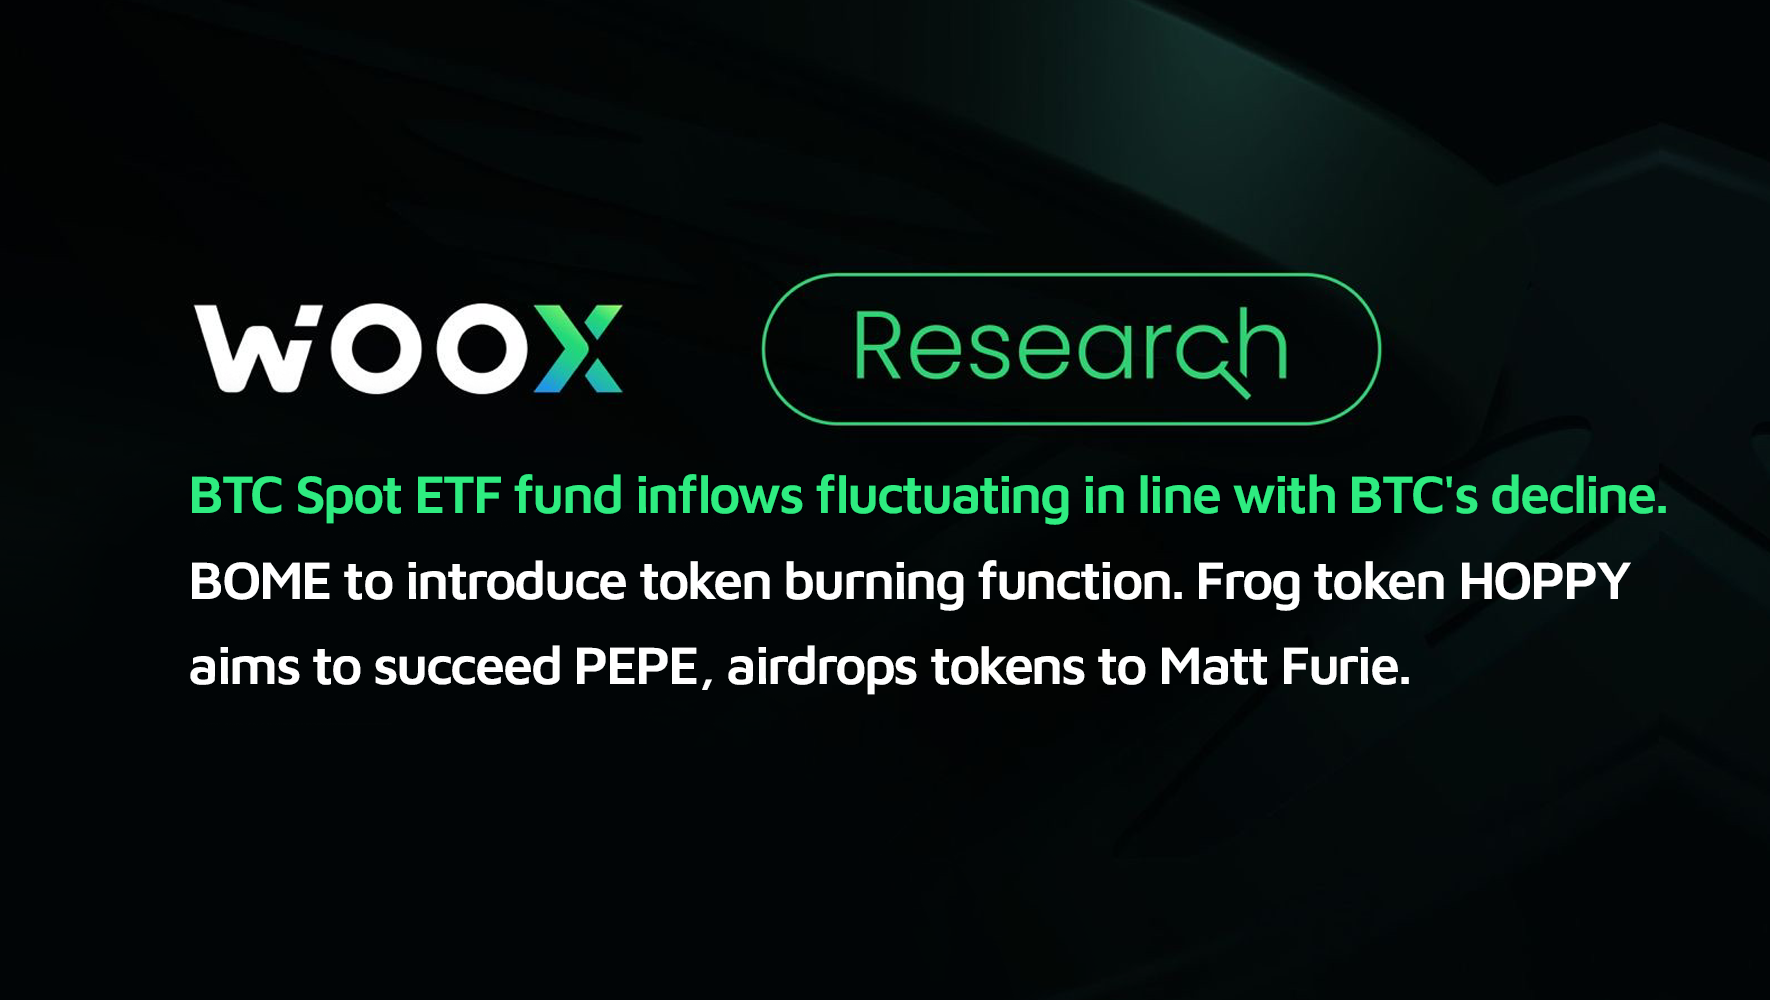 BTC Spot ETF fund inflows fluctuating in line with BTC's decline